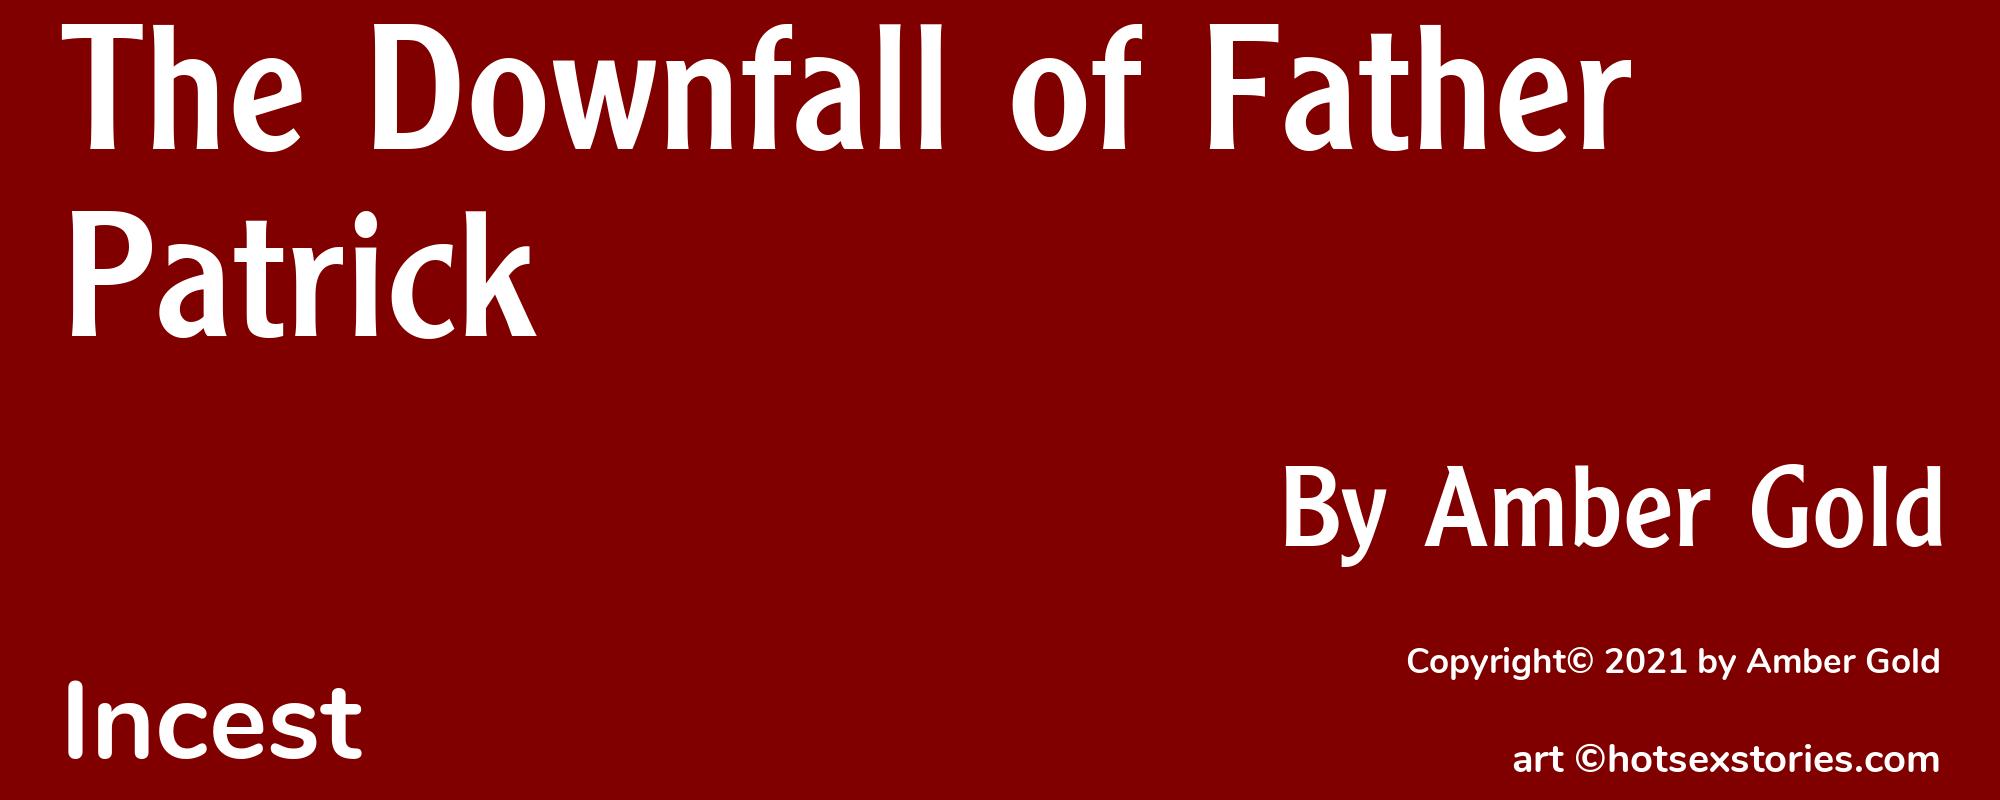 The Downfall of Father Patrick - Cover